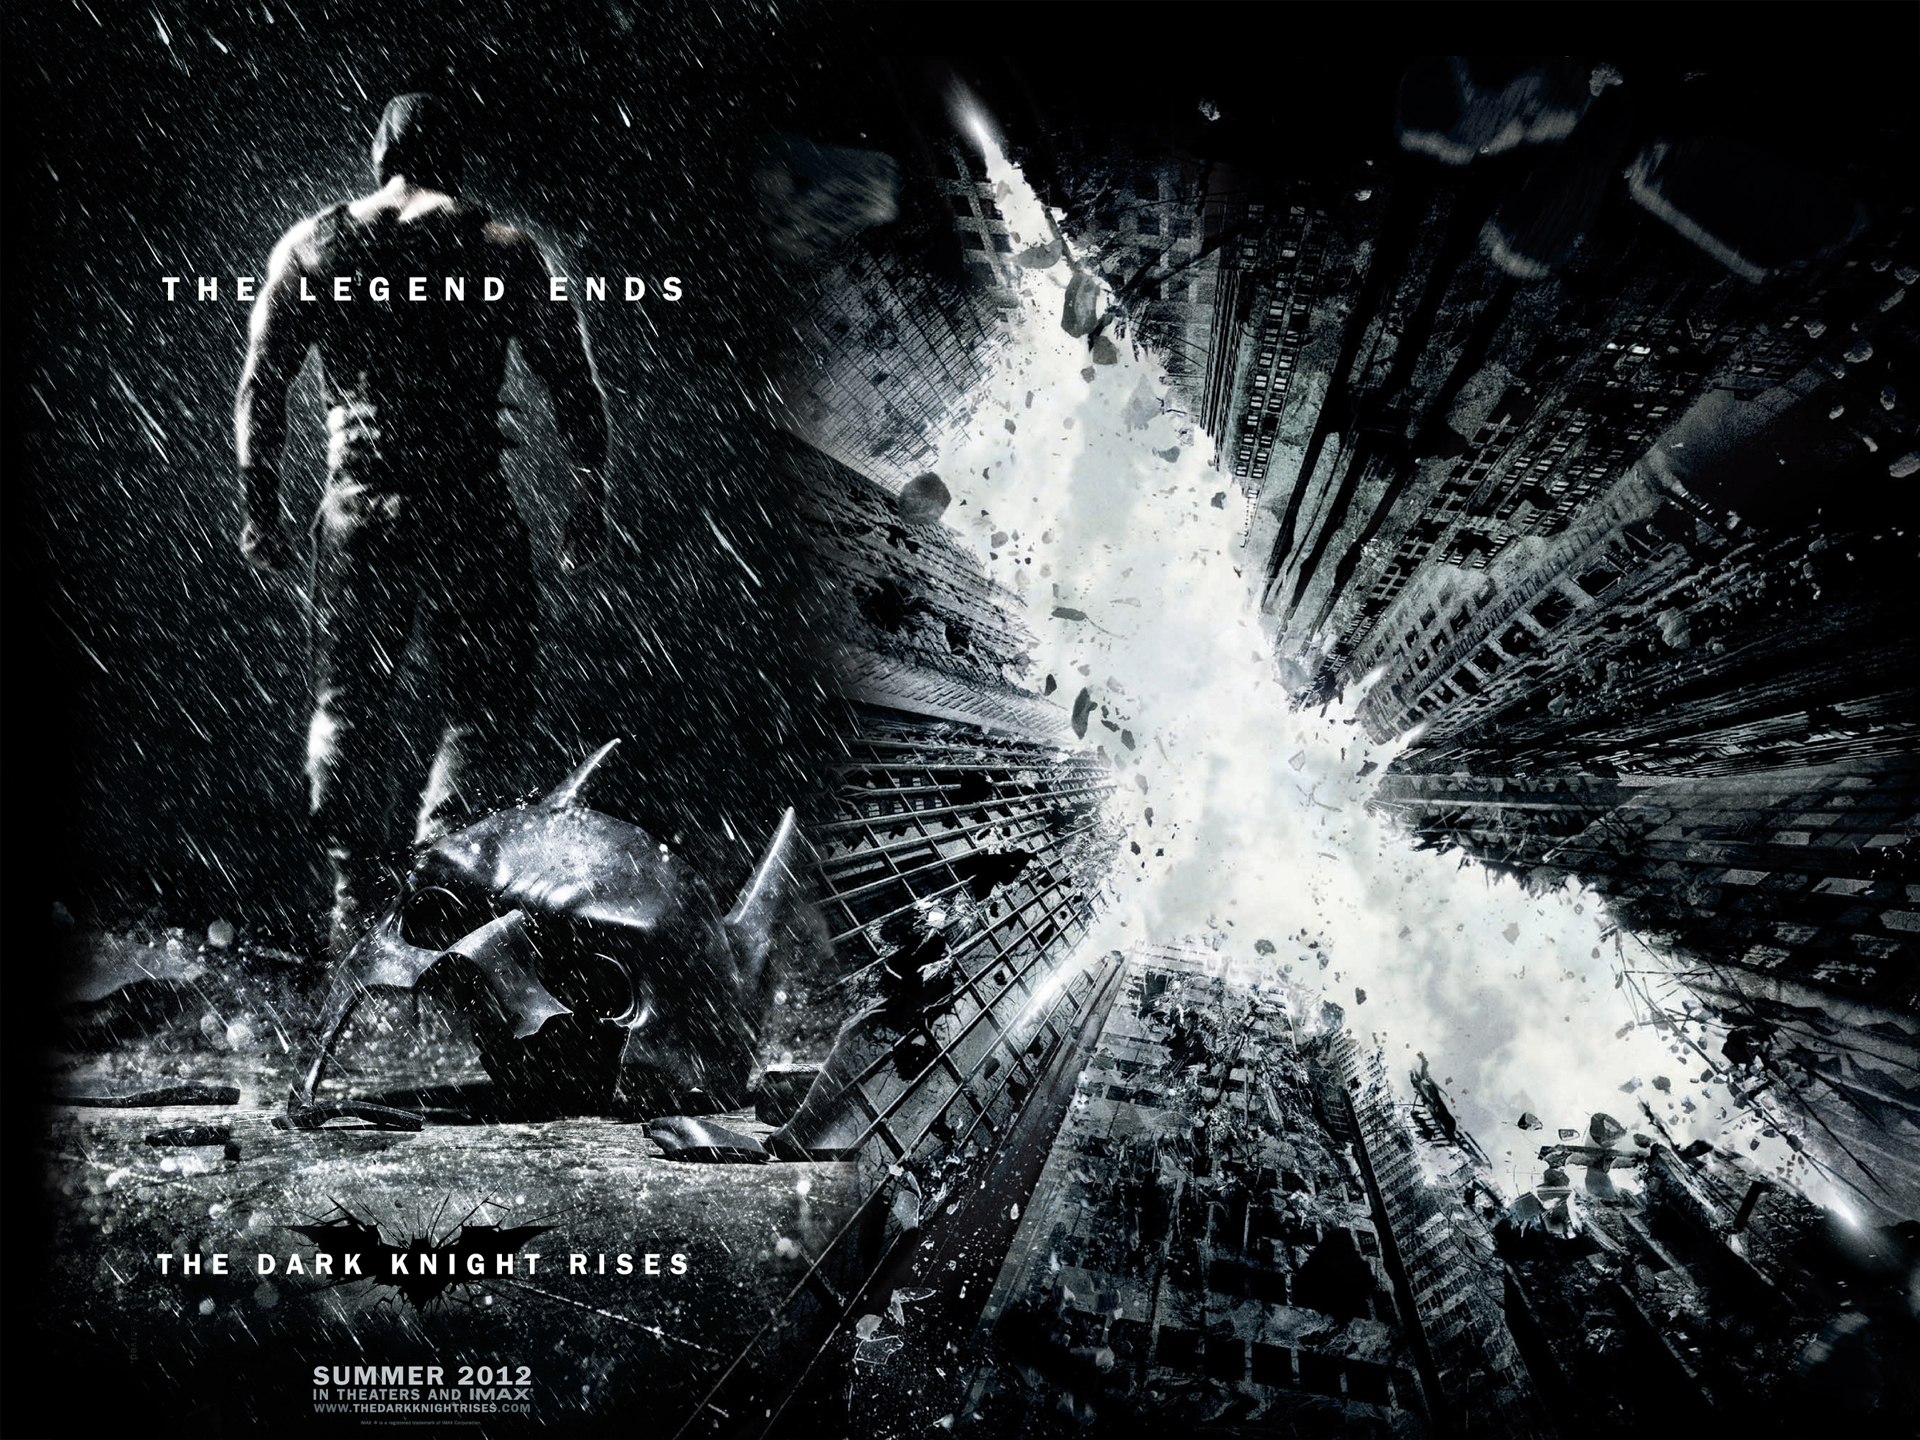 The Dark Knight Rises Bane Wallpaper Image Amp Pictures Becuo